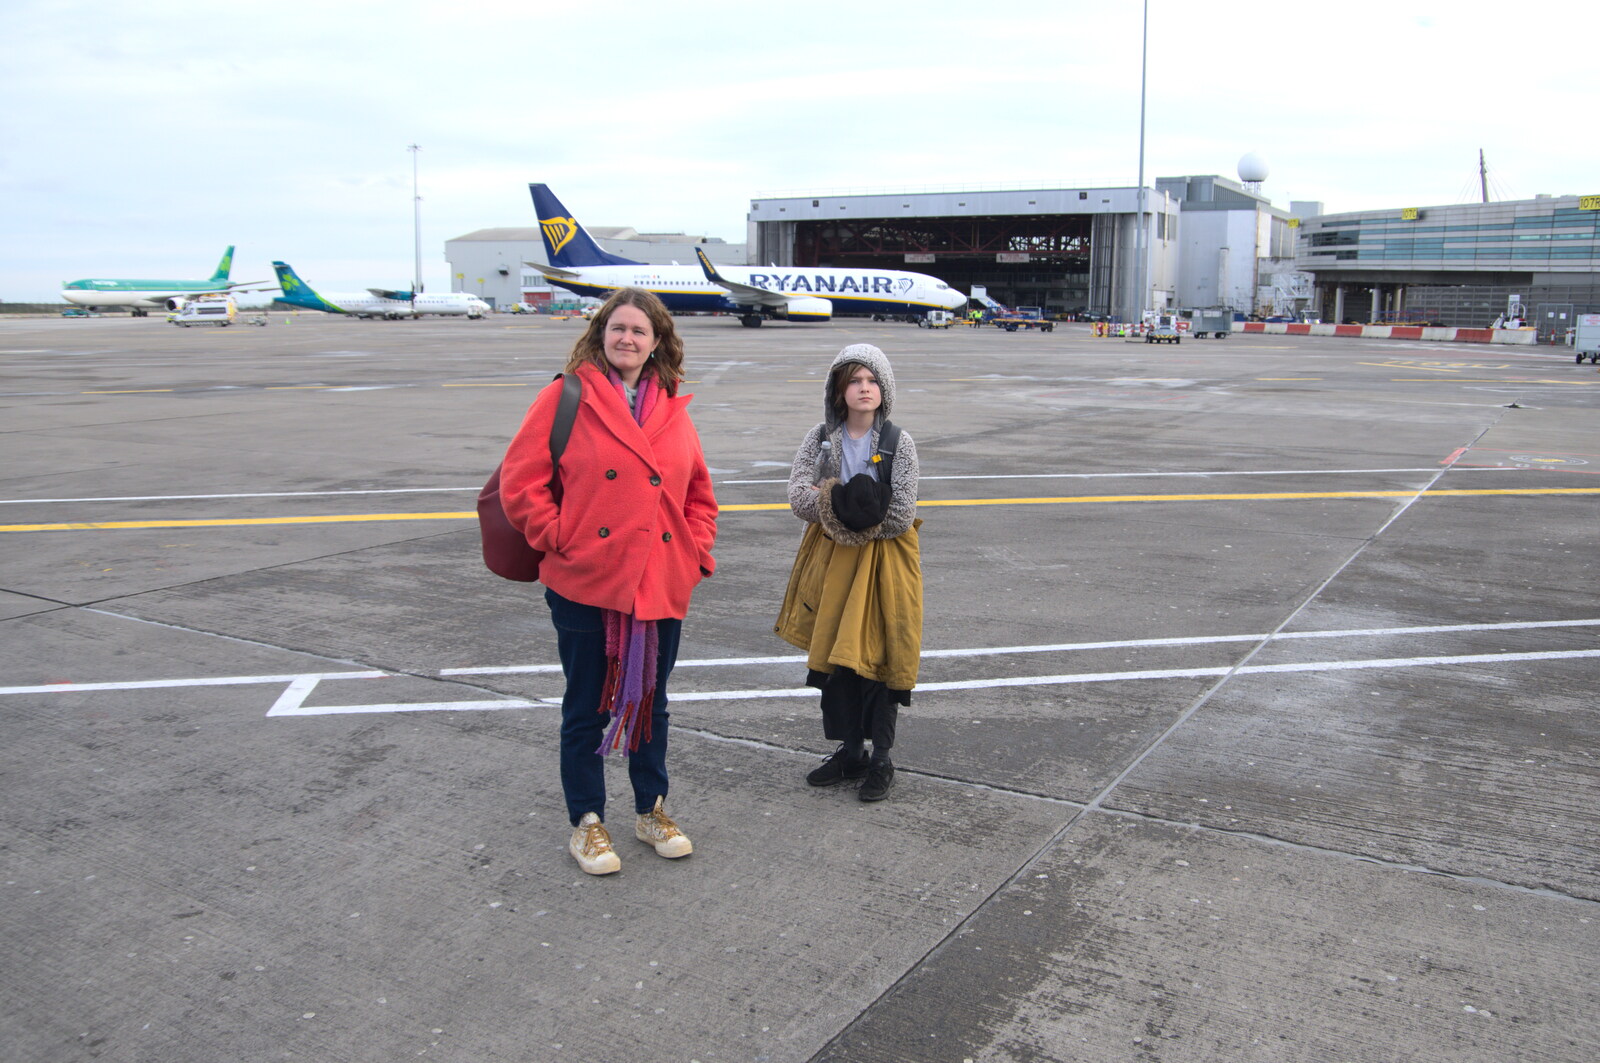 Blackrock North and Newgrange, County Louth, Ireland - 16th February 2023: Isobel and Harry on the apron at Dublin airport